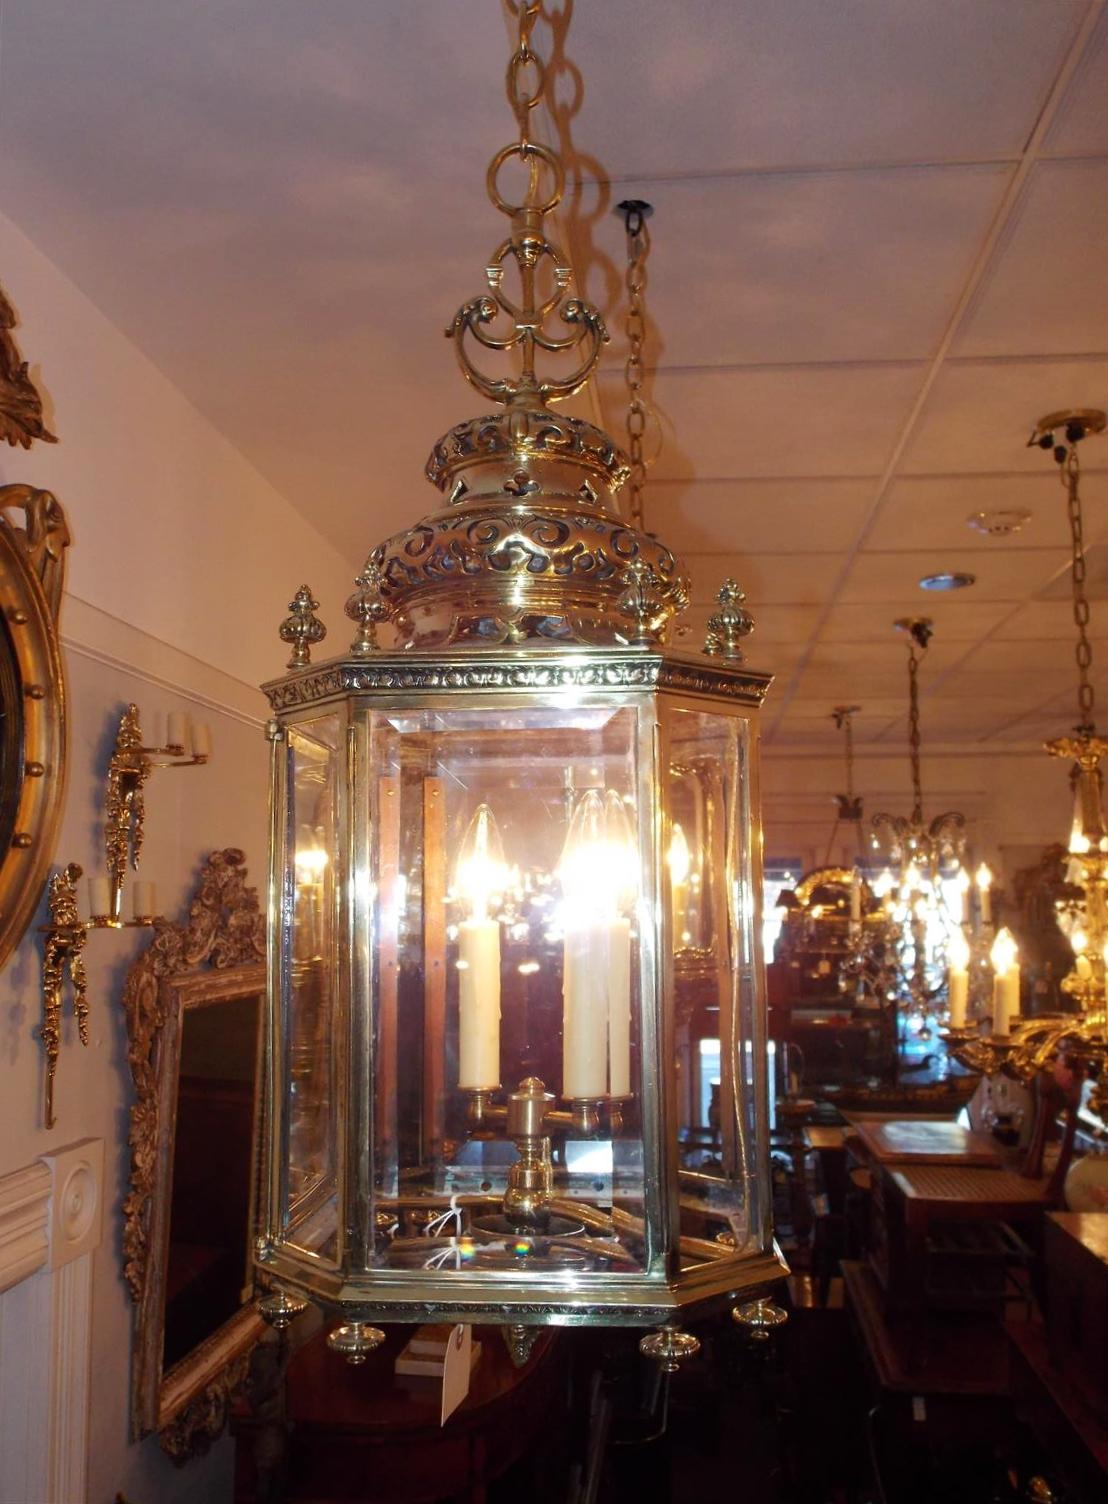 English brass octagon hanging hall lantern with a centered scrolled acanthus ring over a decorative bulbous two tiered hand chased pierced dome, original beveled glass with a single hinged locking door, eight upper floral finials with a filigree